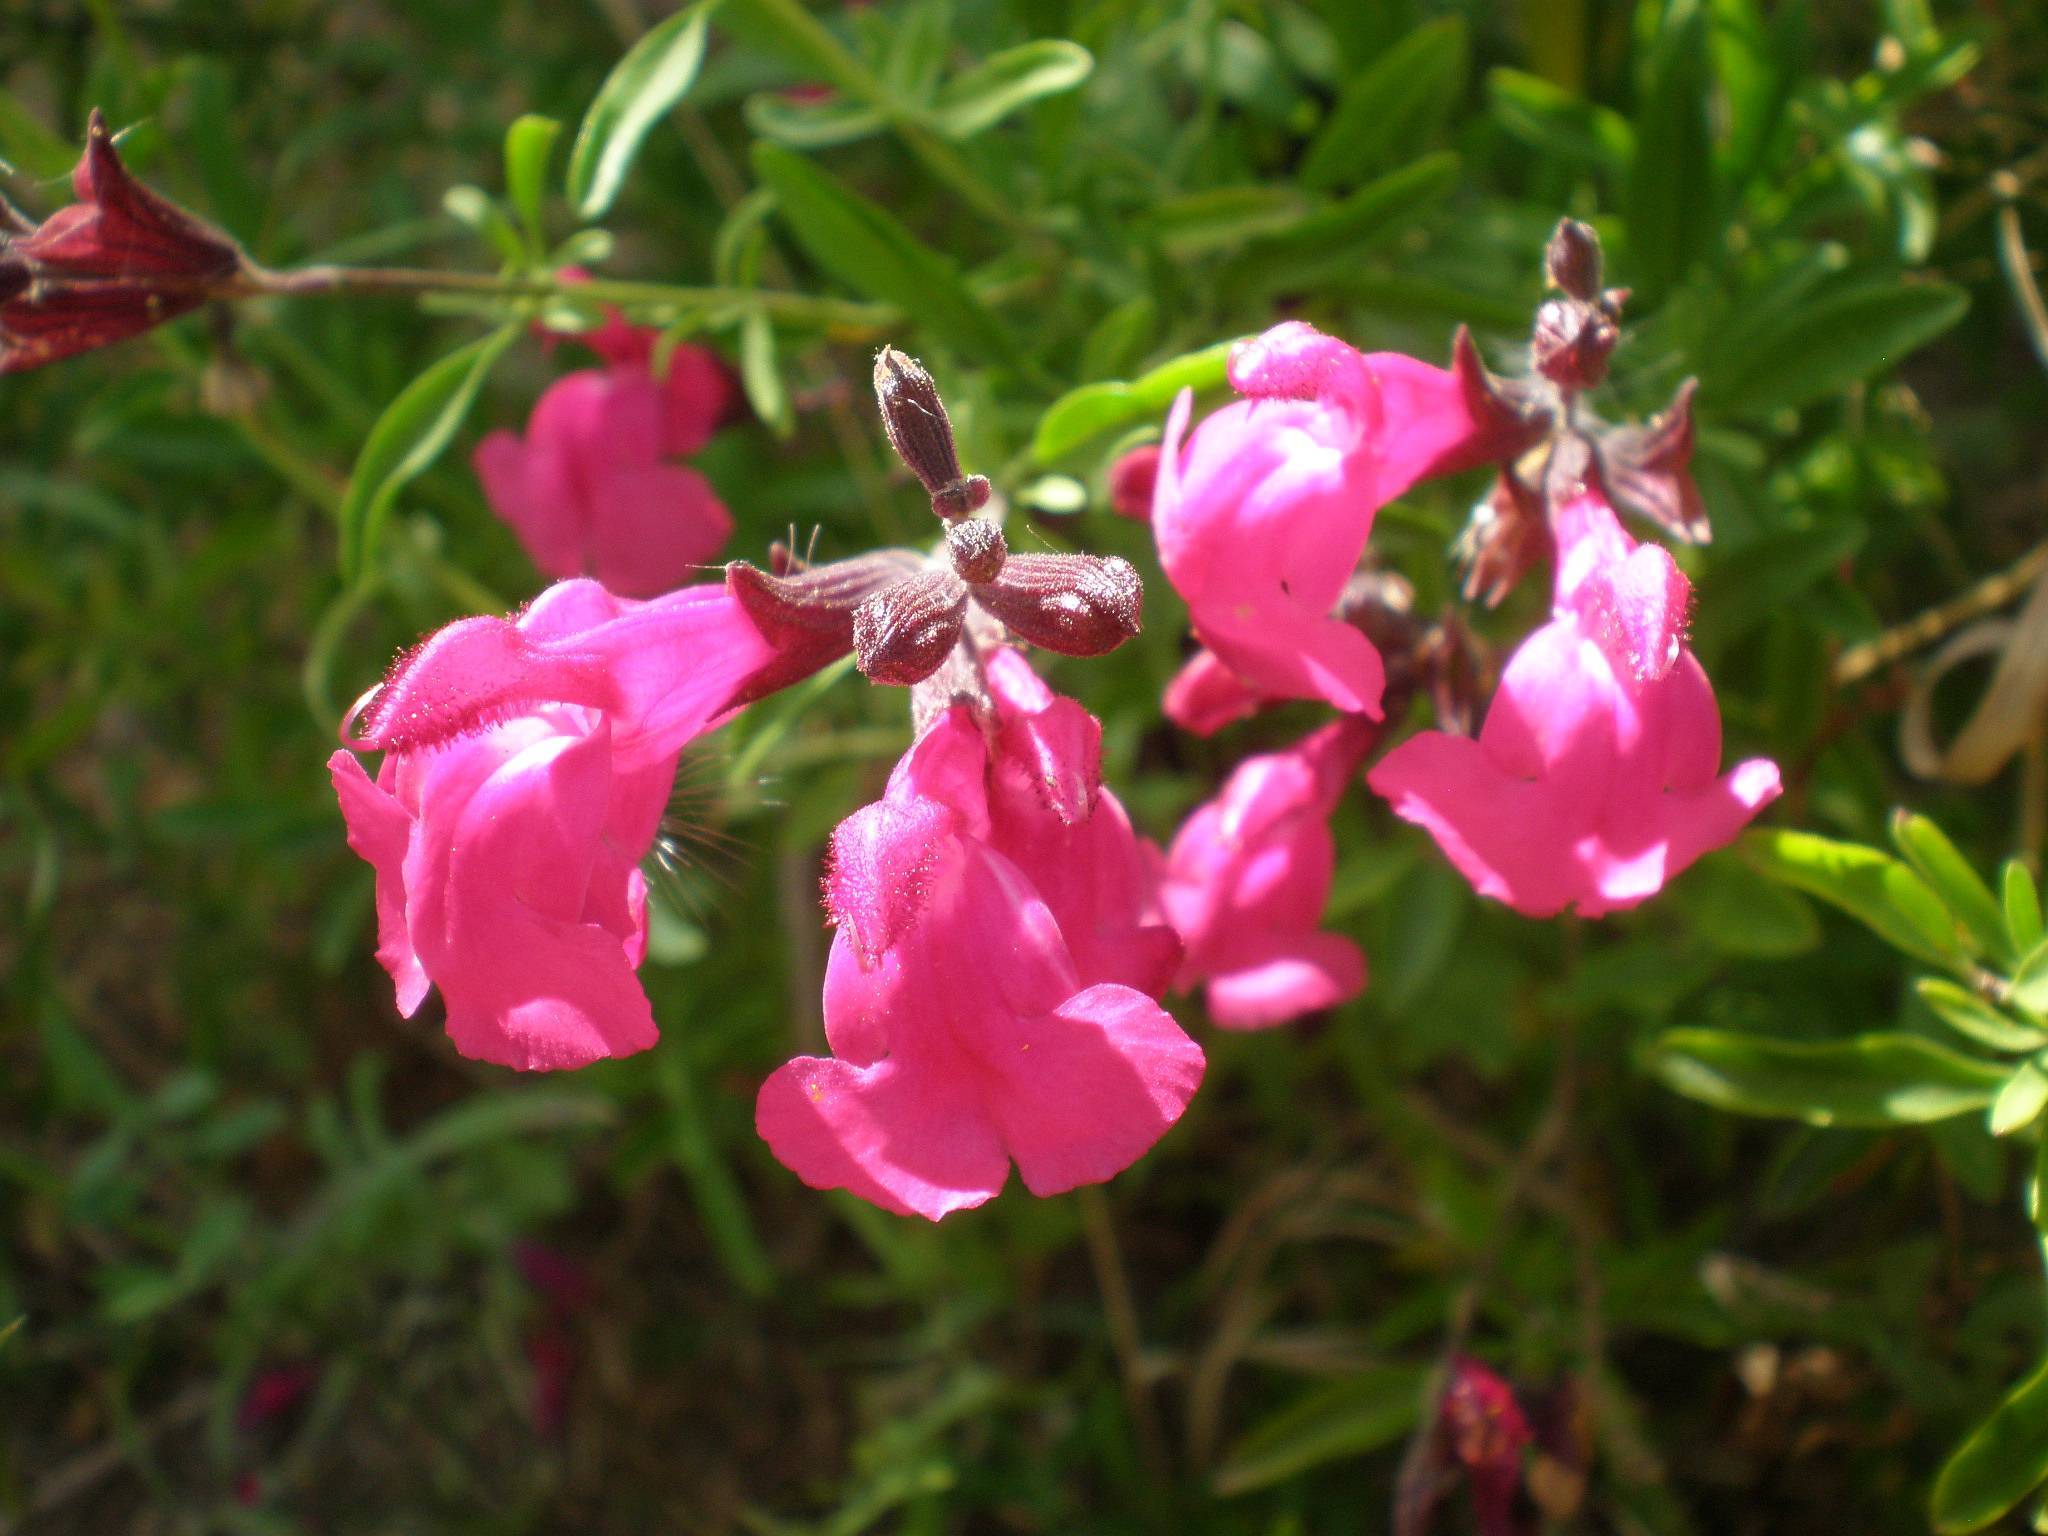 pink flowers with green leaves, burgundy buds and green stems